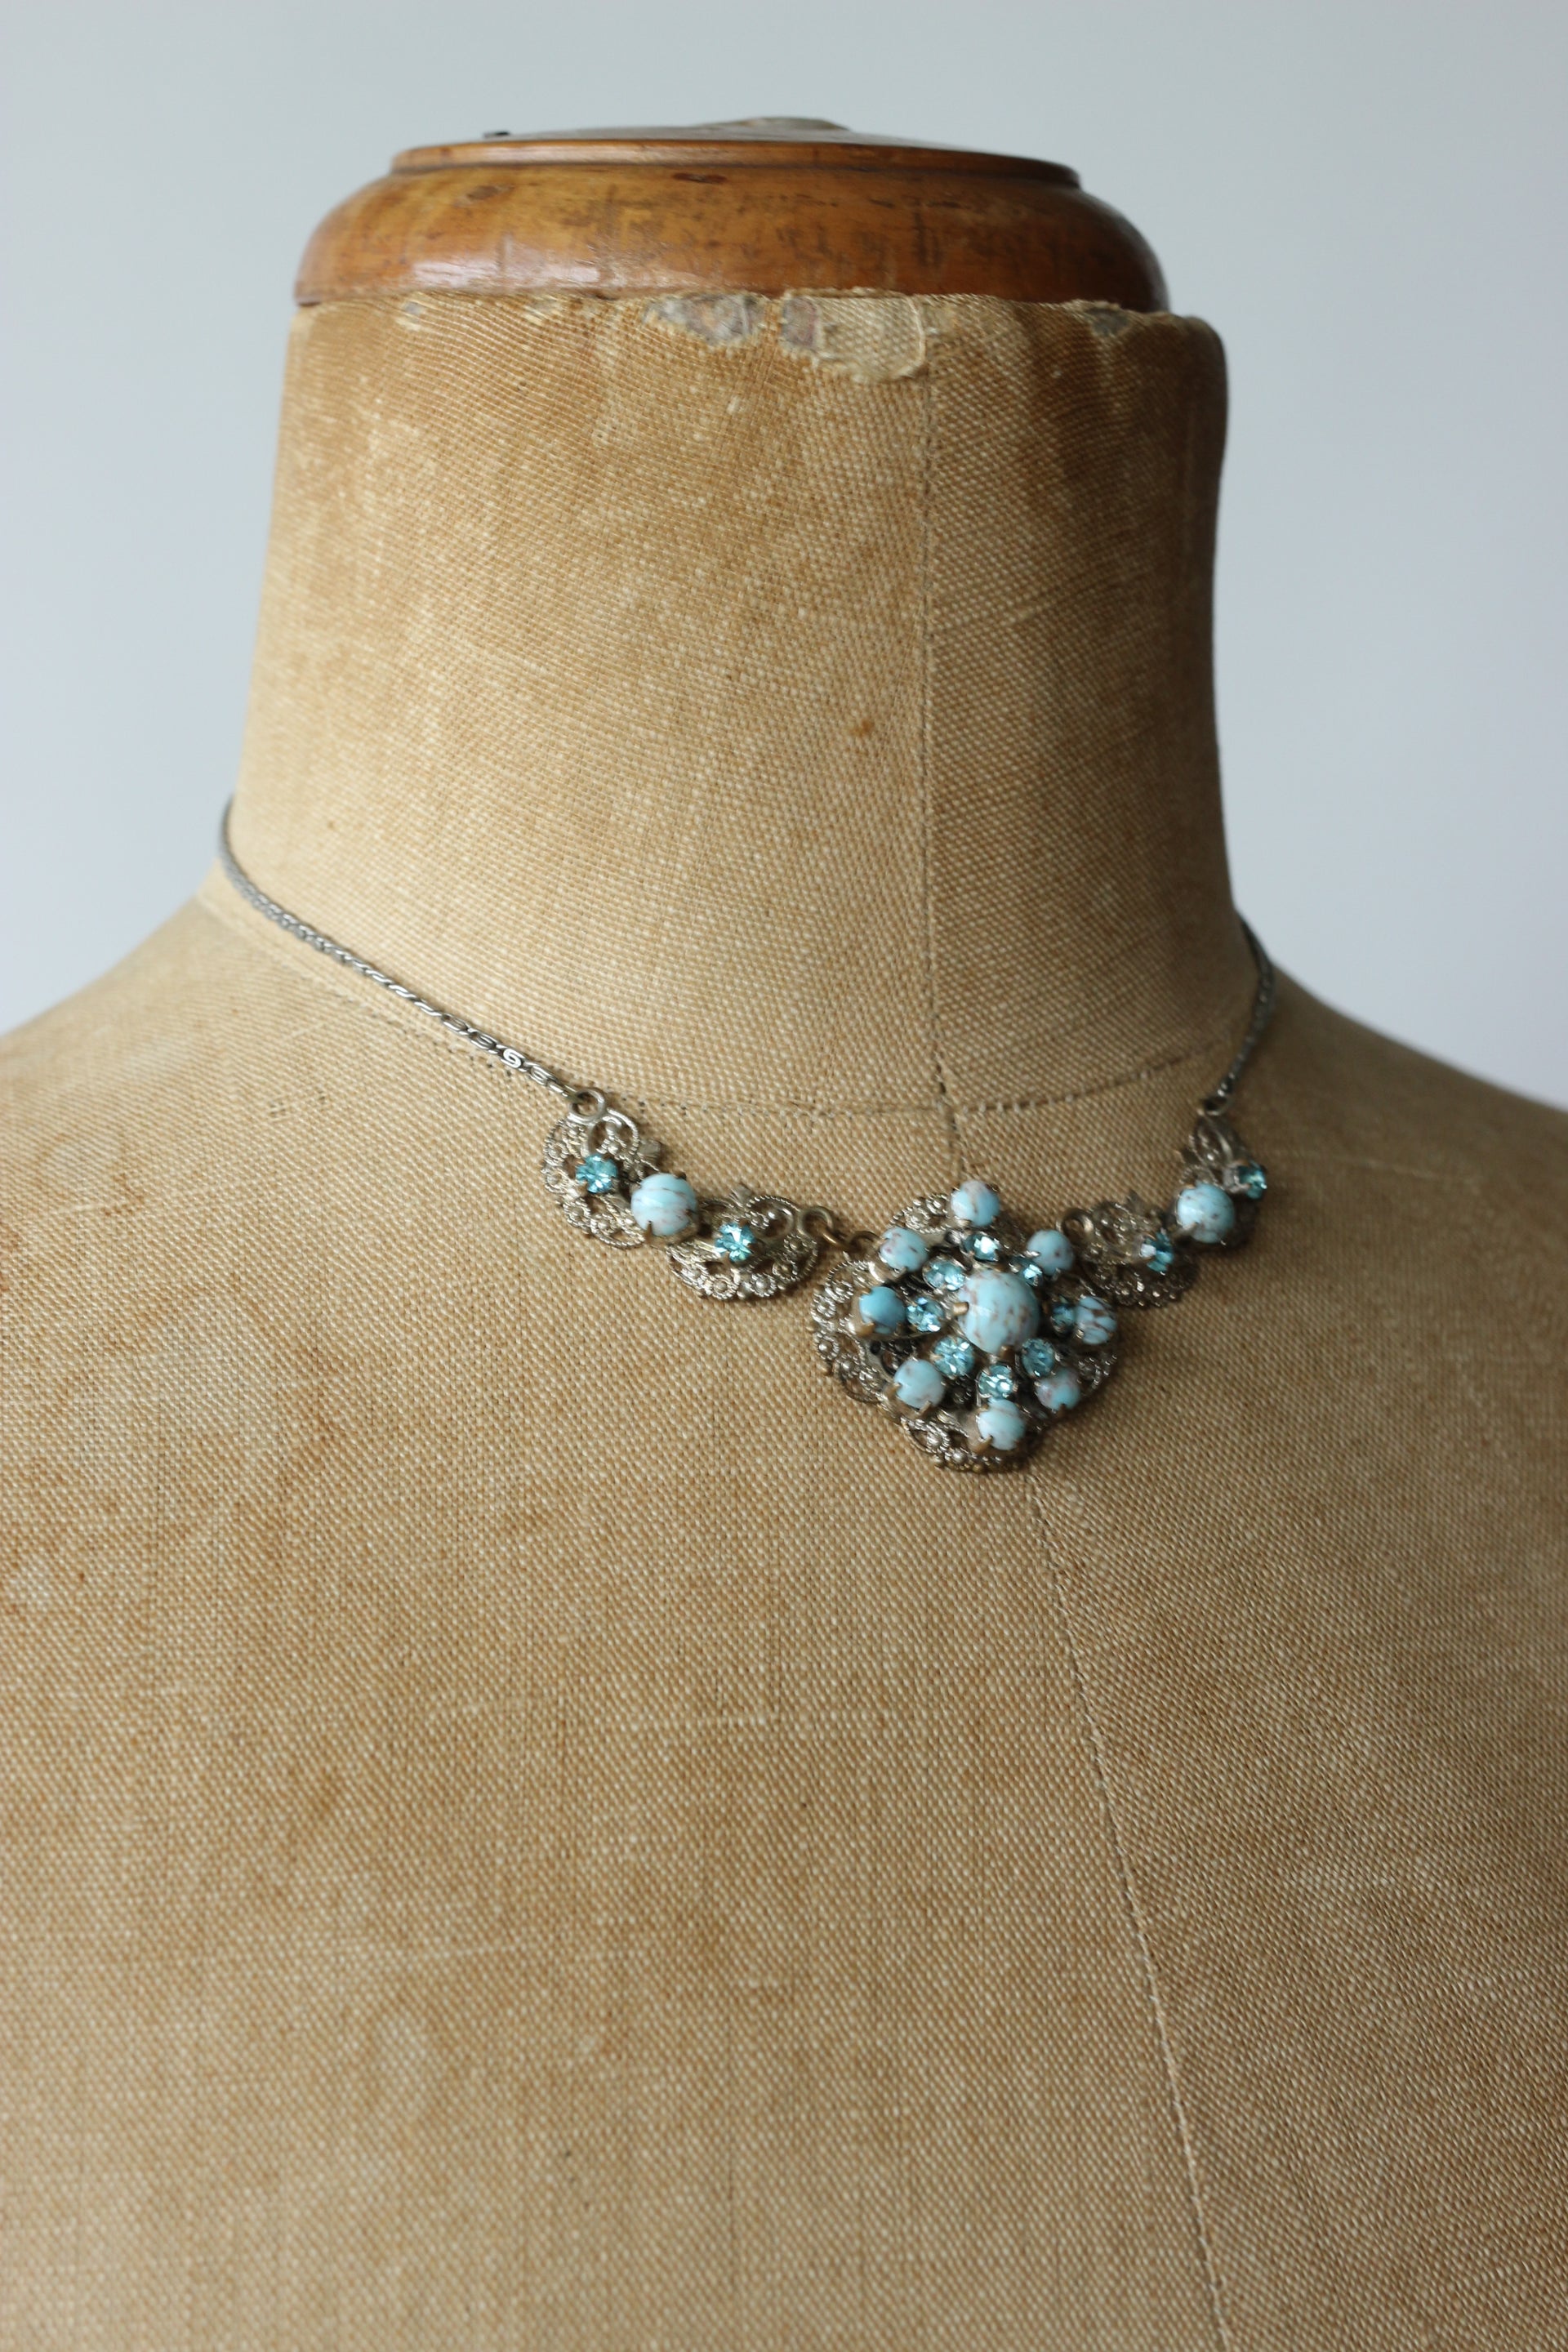 1930s - 1940s  Turquoise Blue Glass and Rhinestone Filigree Necklace